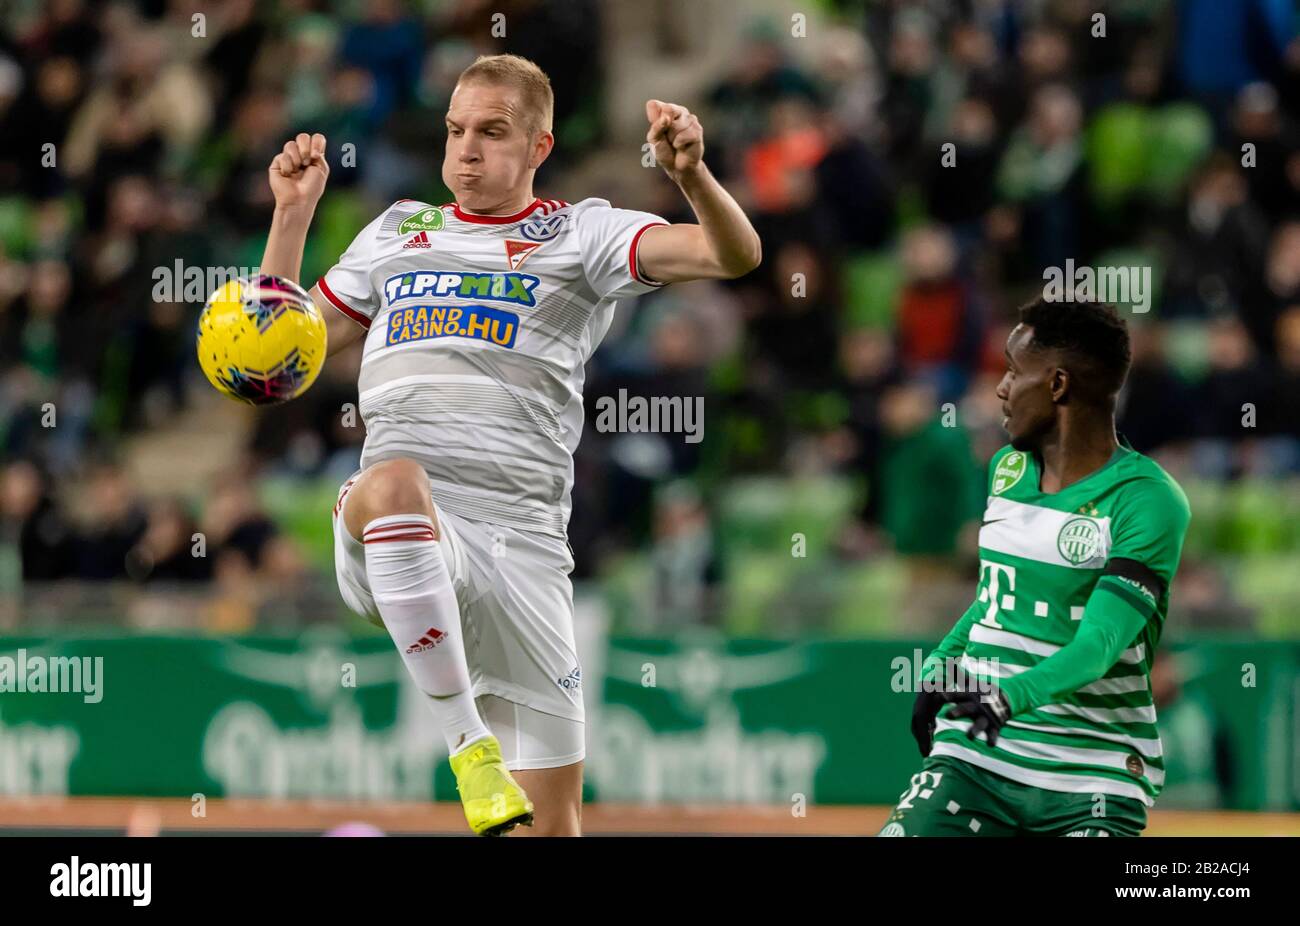 BUDAPEST, HUNGARY - AUGUST 29: (l-r) Tokmac Chol Nguen of Ferencvarosi TC  celebrates his goal in front of Gergo Lovrencsics of Ferencvarosi TC during  the UEFA Europa League Play-off Second Leg match